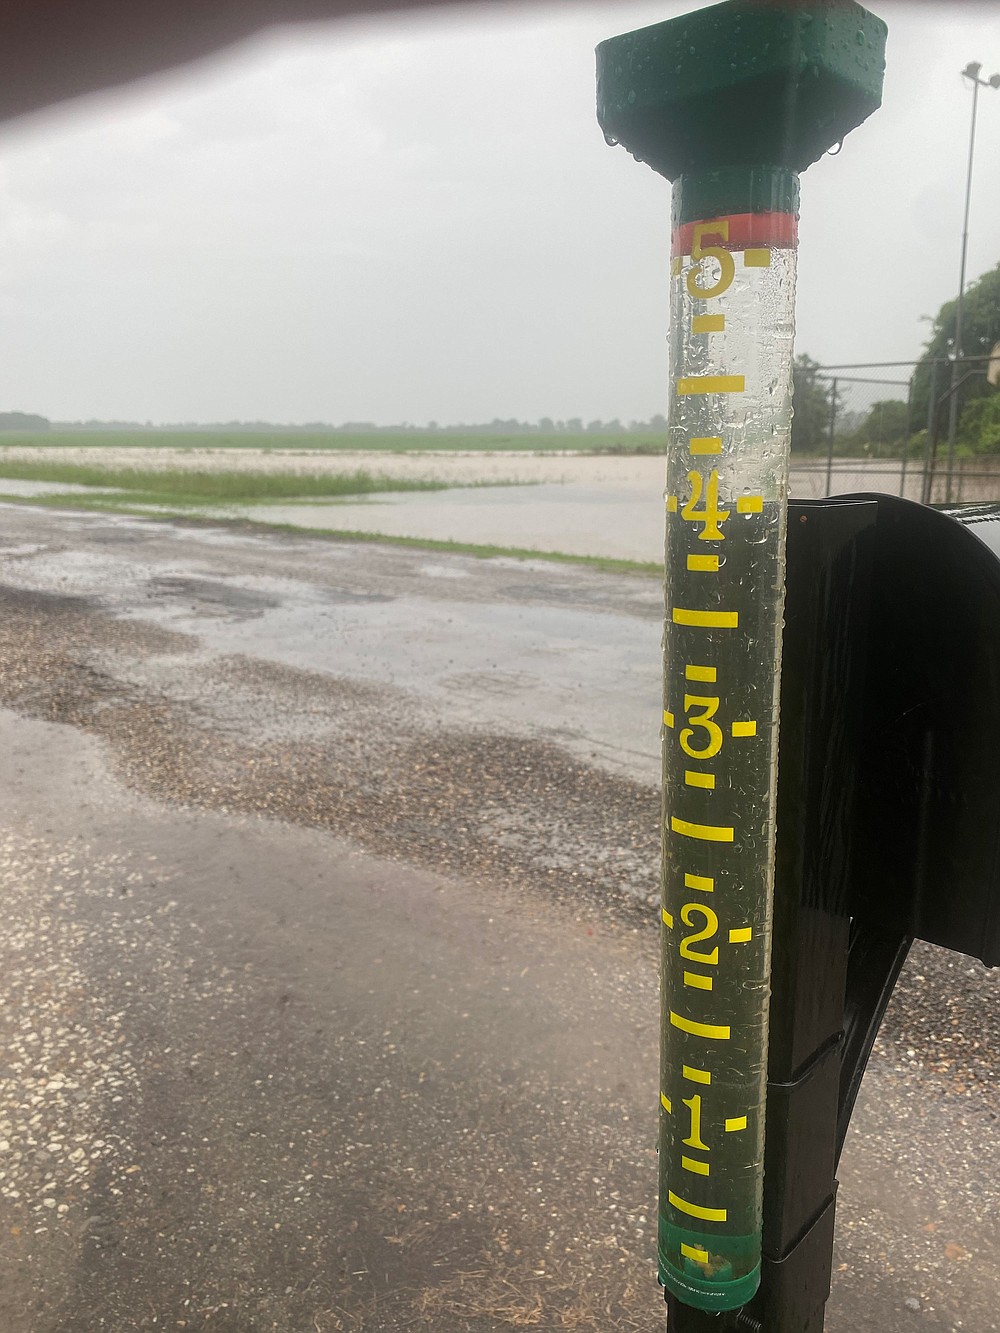 A rain gauge near Lake Chicot in Chicot County reflects the high volume of rain received Thursday in the area. (Special to The Commercial, Clay Gibson/University of Arkansas System Division of Agriculture)